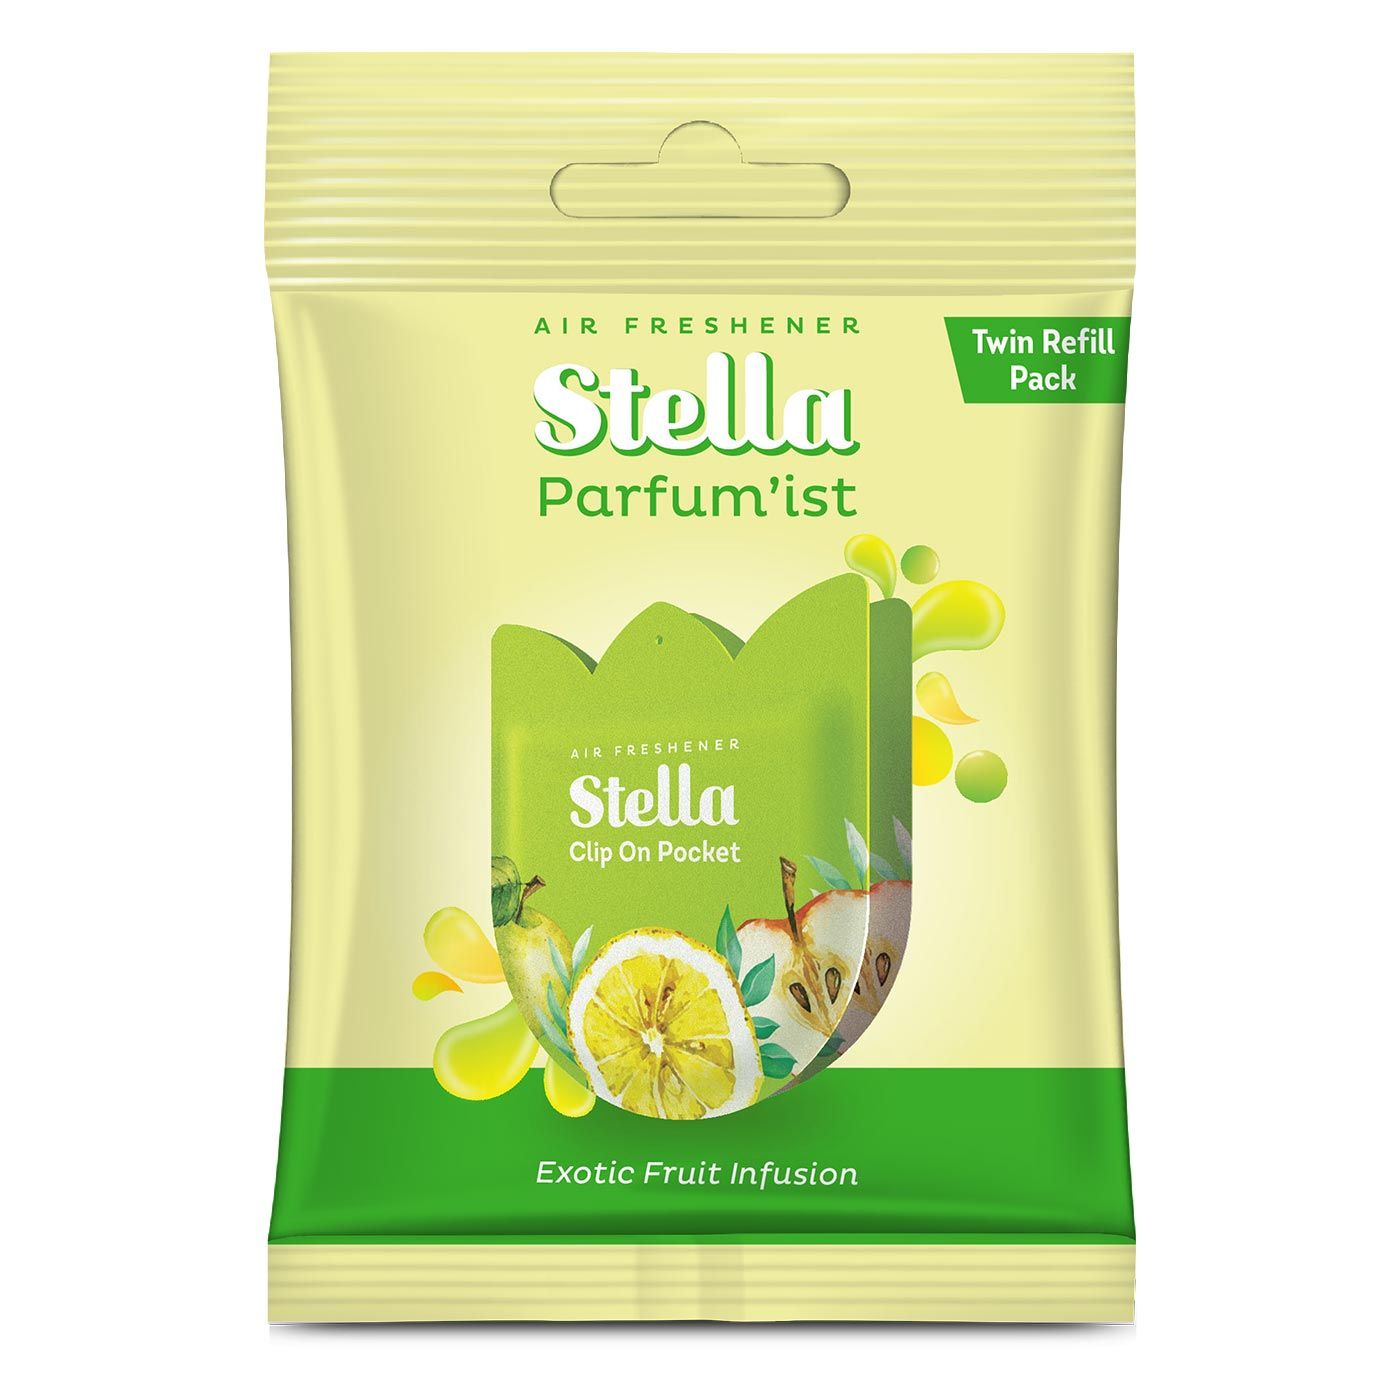 Stella Clip On Pocket Fruity (Exotic Fruit Infusion) Refill 14gr - 1